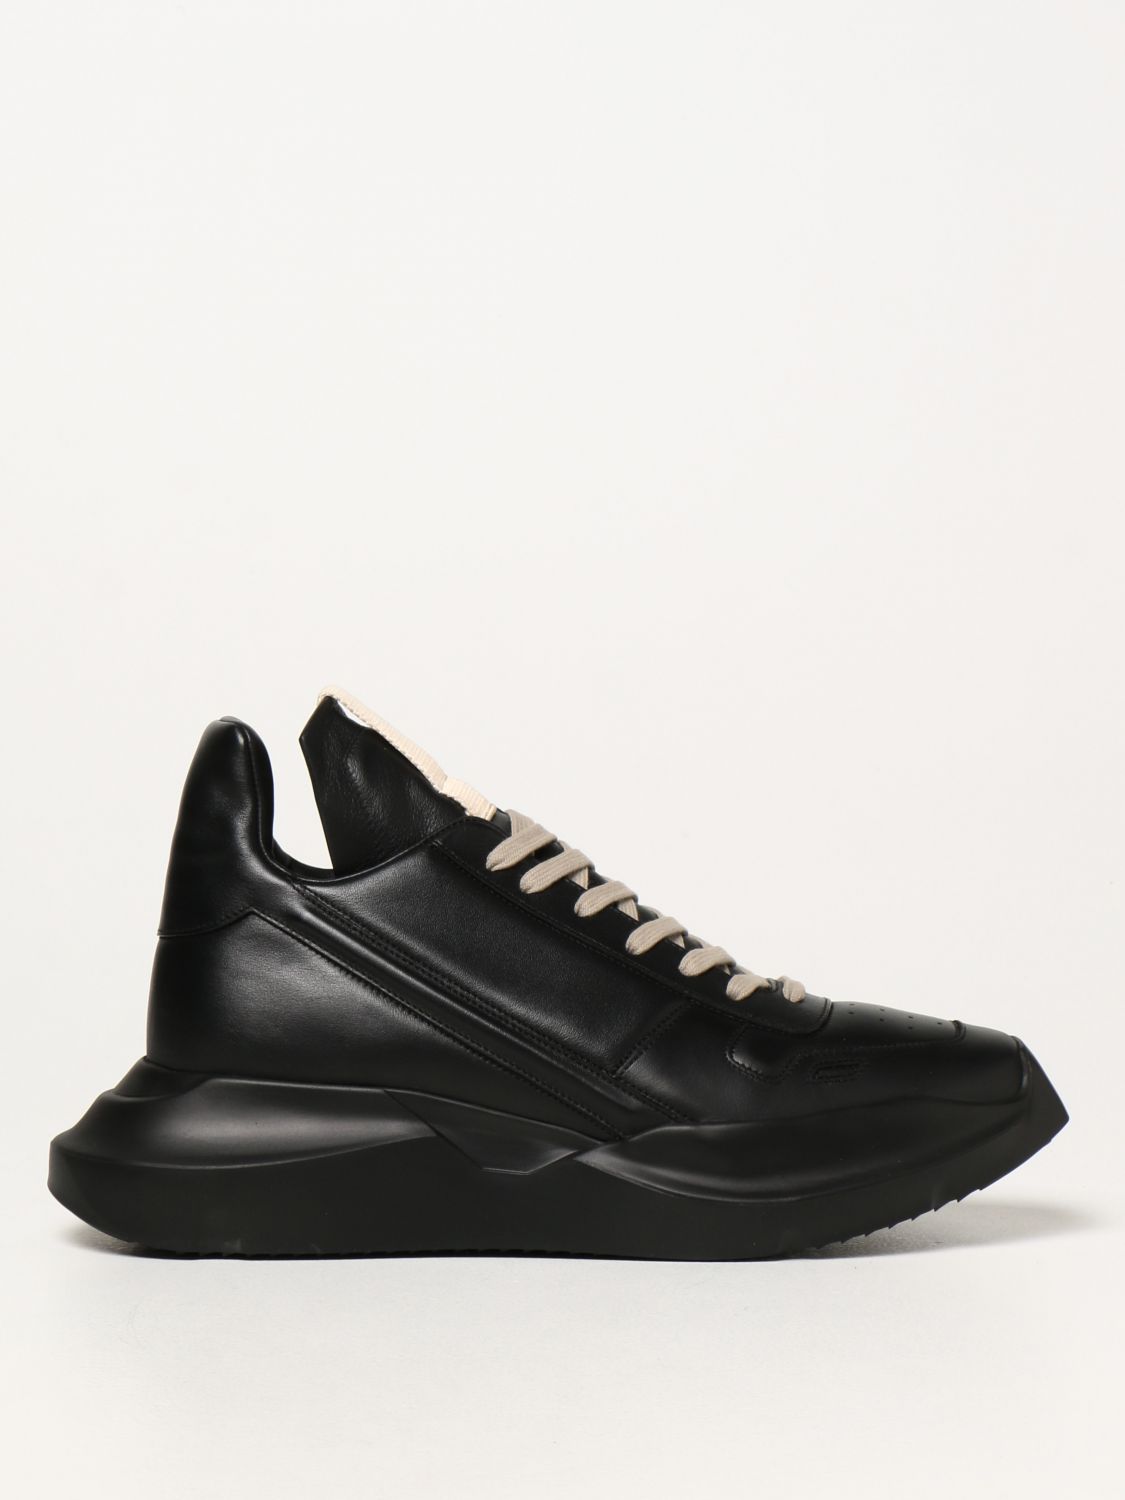 Sparsommelig Adgang Monument RICK OWENS: Shoes men | Sneakers Rick Owens Men Black | Sneakers Rick Owens  RU02A5814LPO GIGLIO.COM